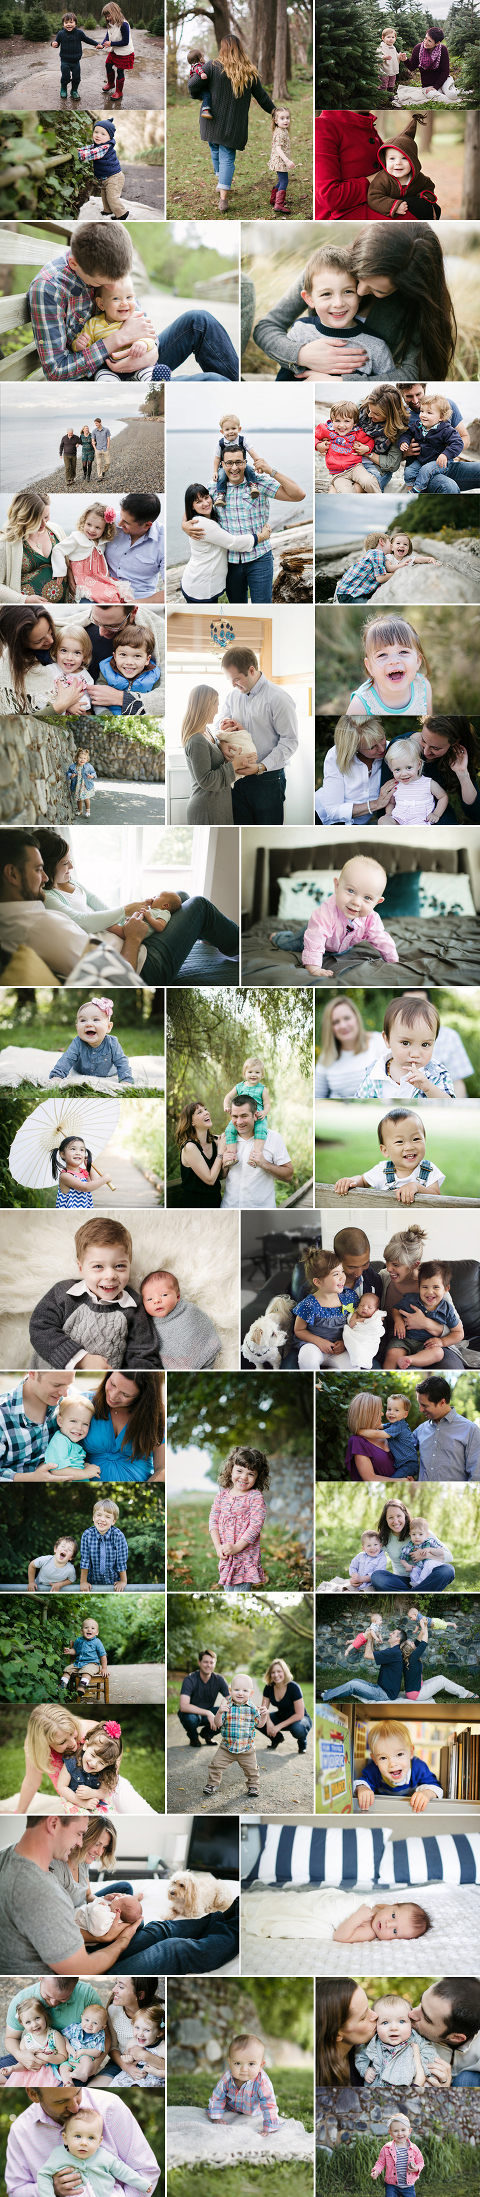 miss freddy, seattle family photographer